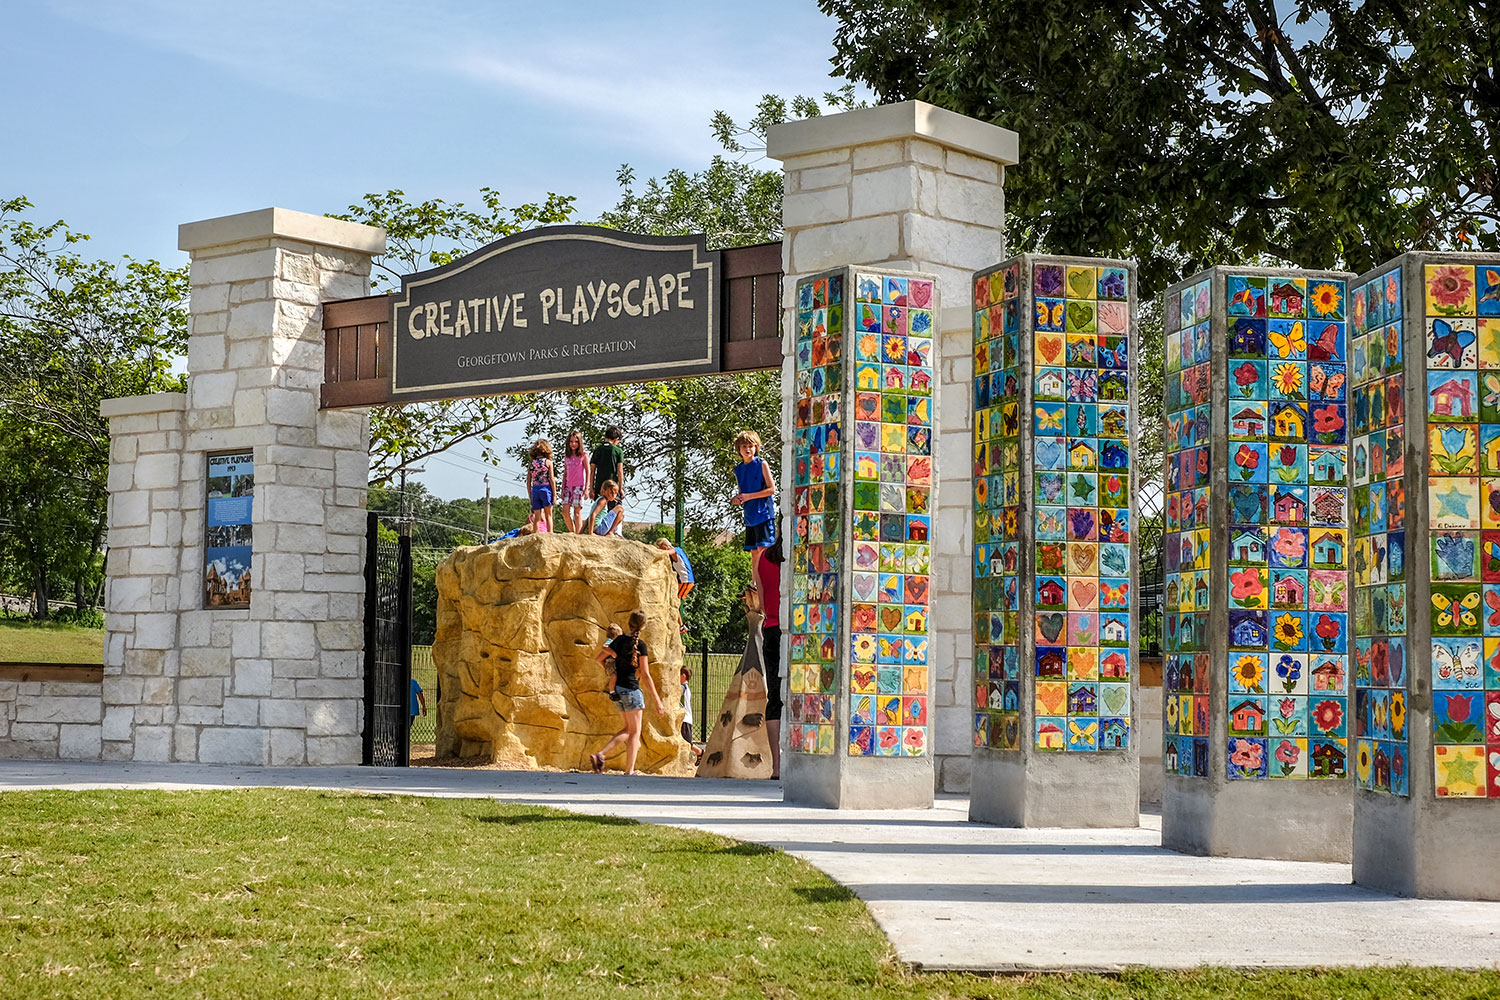 Children playing at the entrance to the Creative Playscape in Georgetown, TX